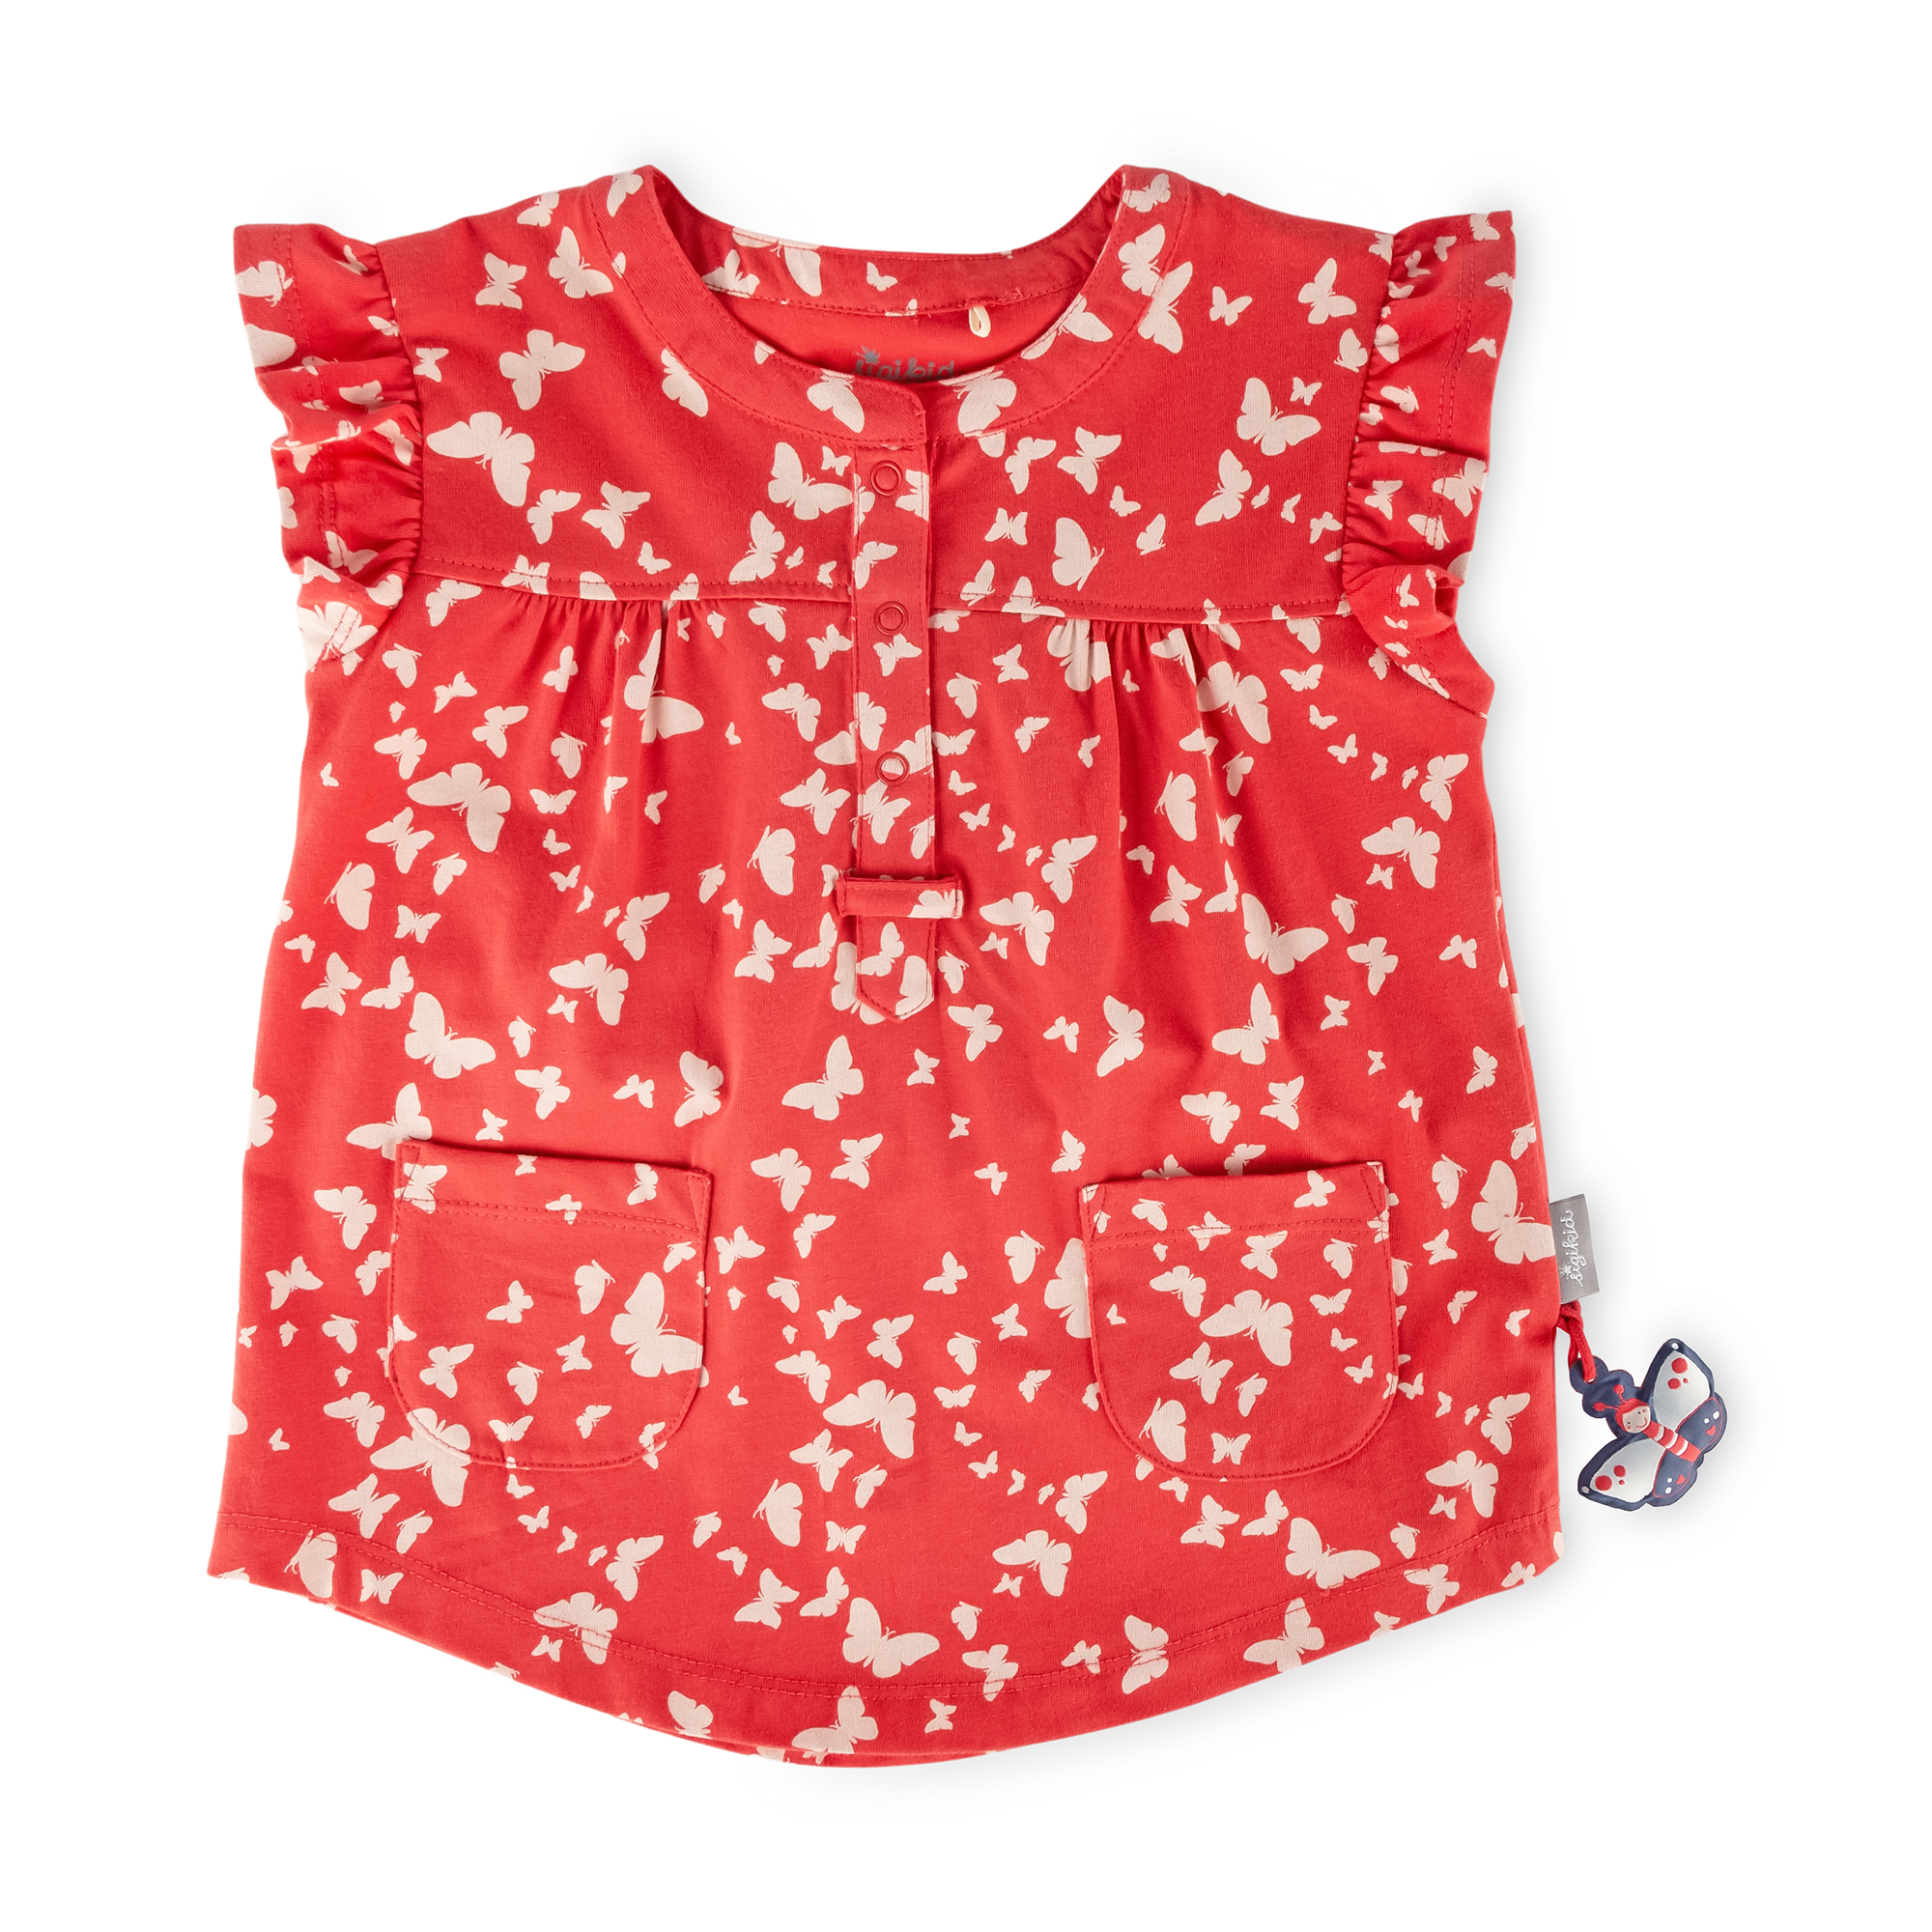 Children's shoulder frill tunic butterfly